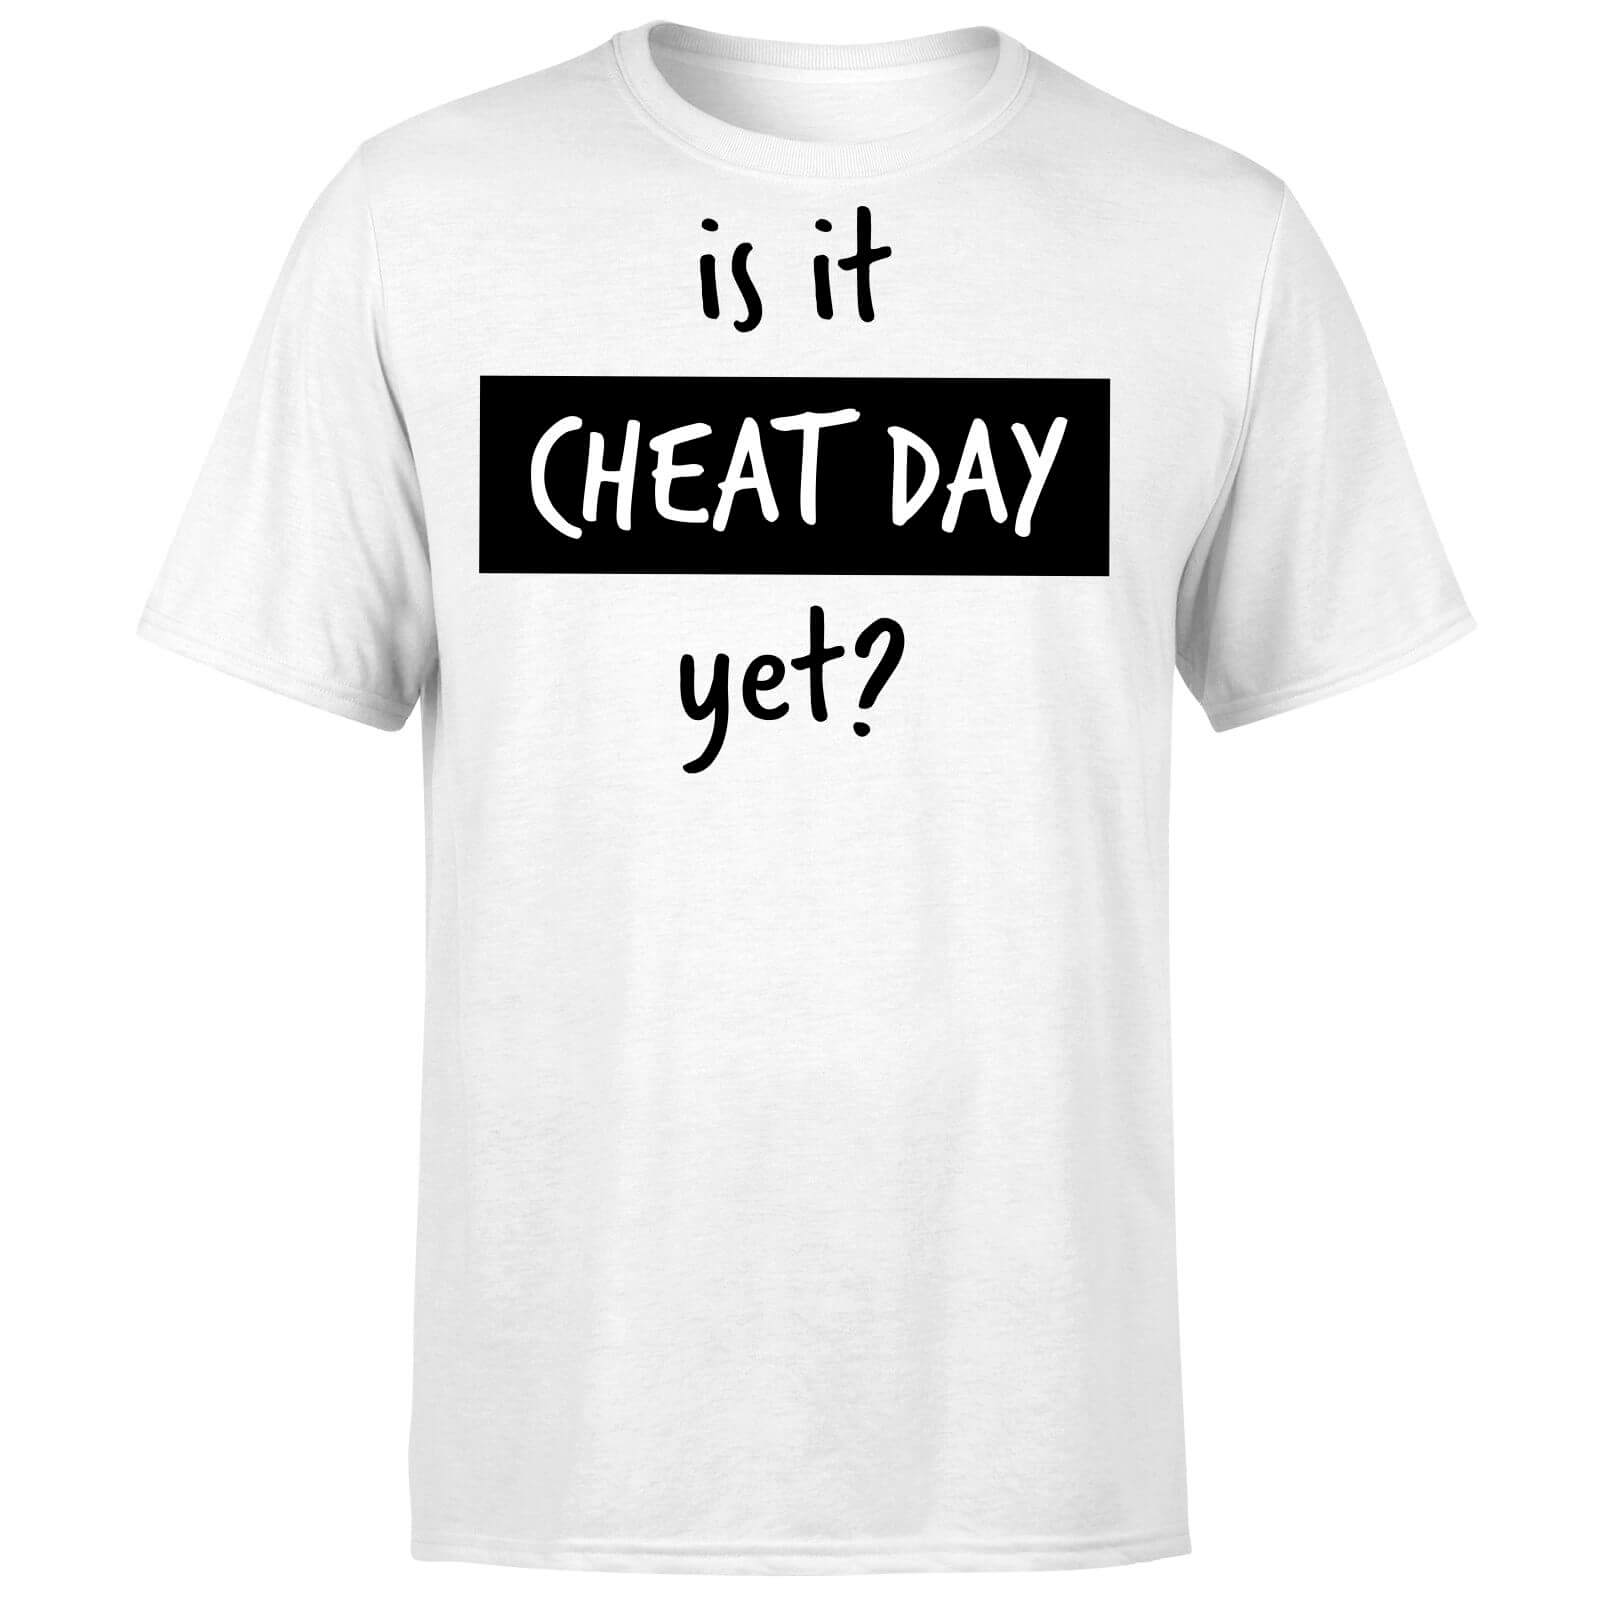 Is it Cheat Day T-Shirt - White - M - White